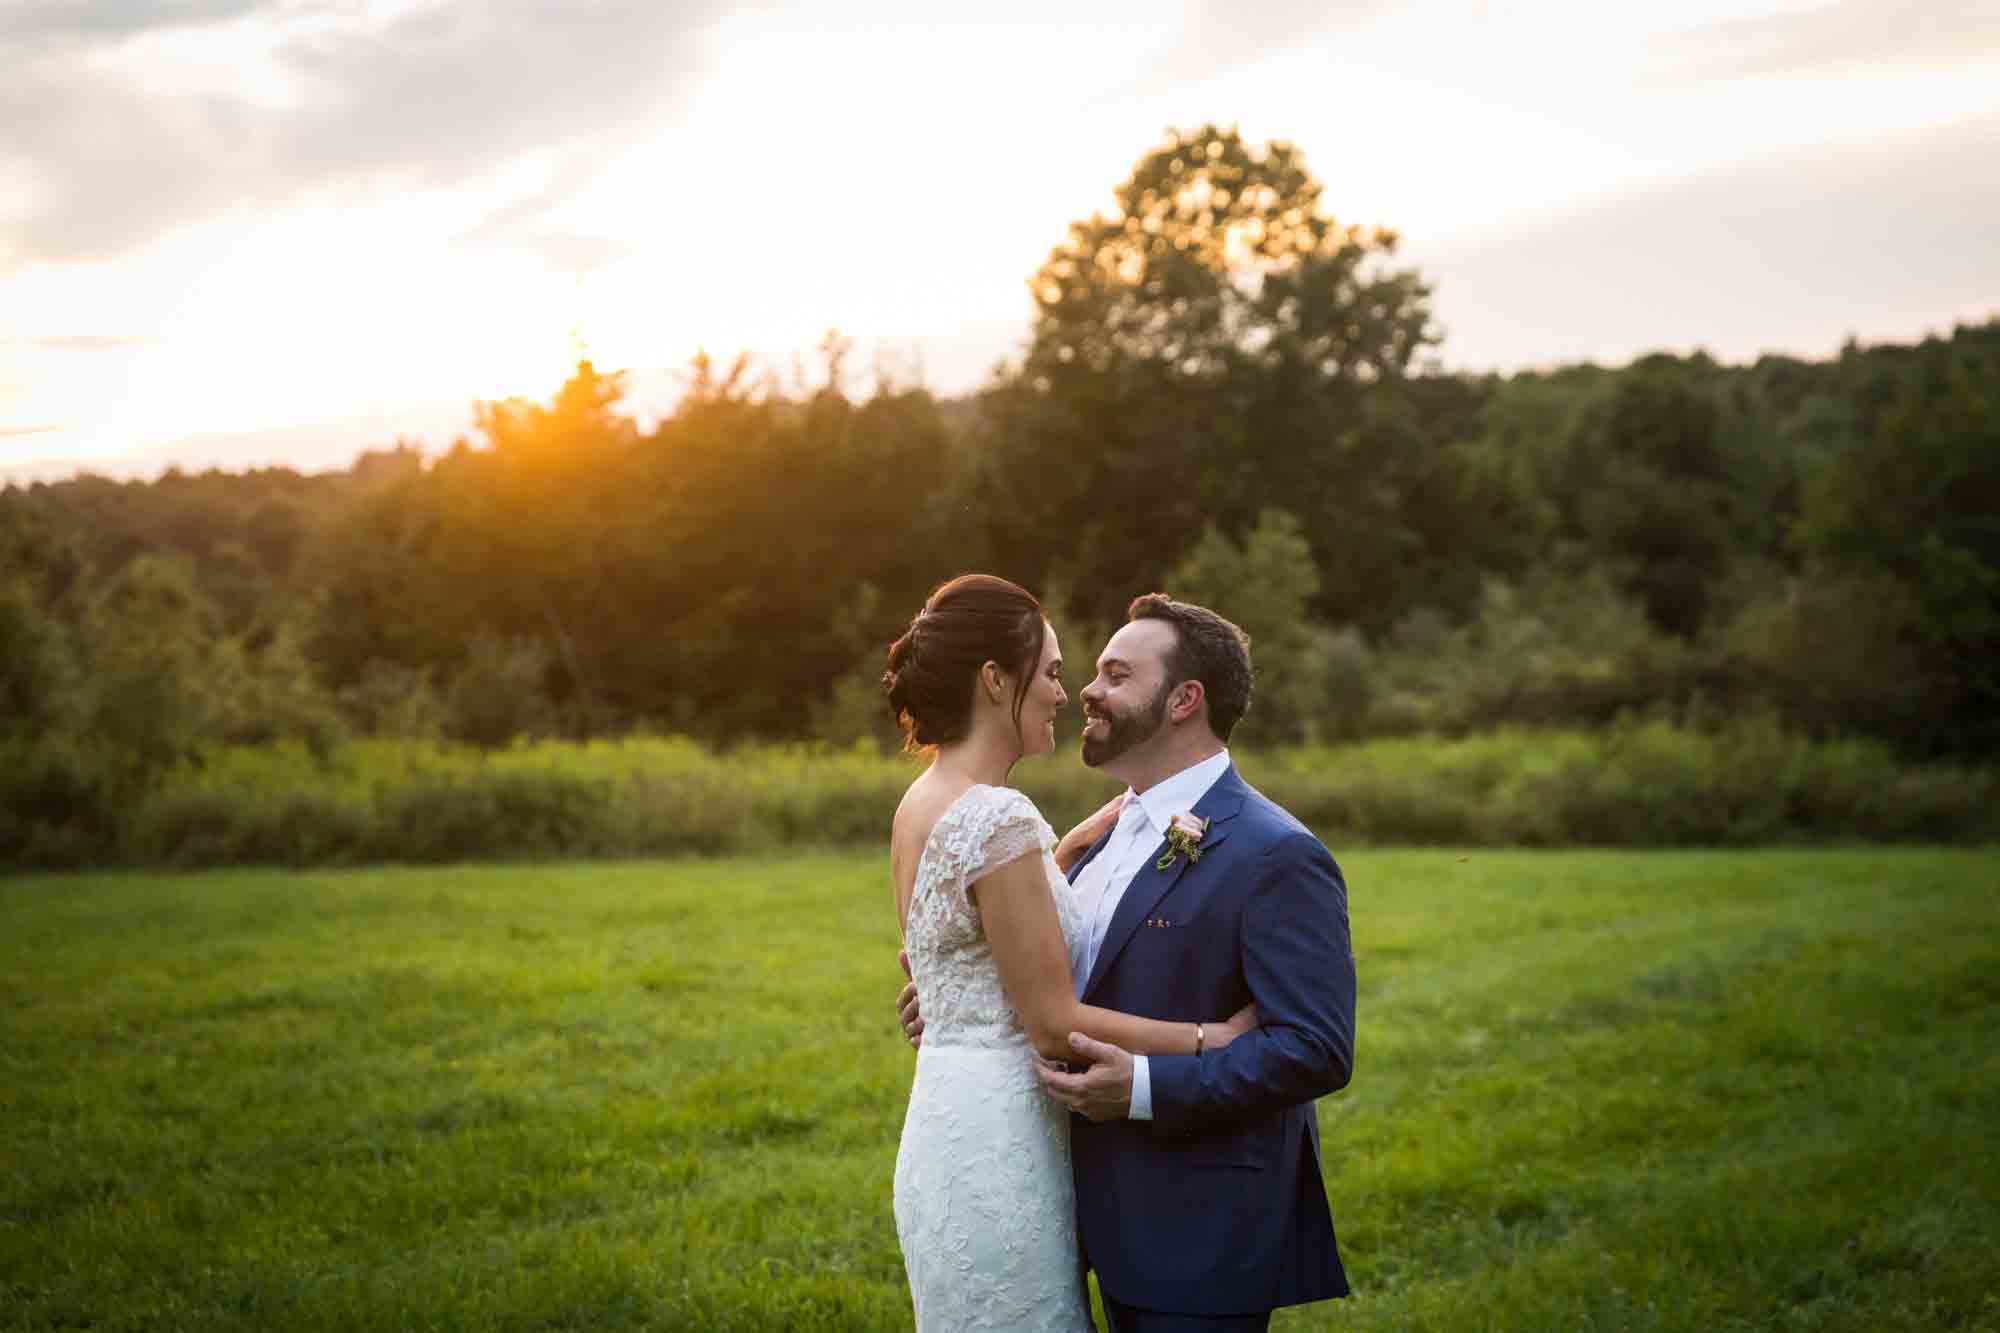 Bride and groom hugging on grass with sunset in background for an article on how to find a San Antonio wedding photographer